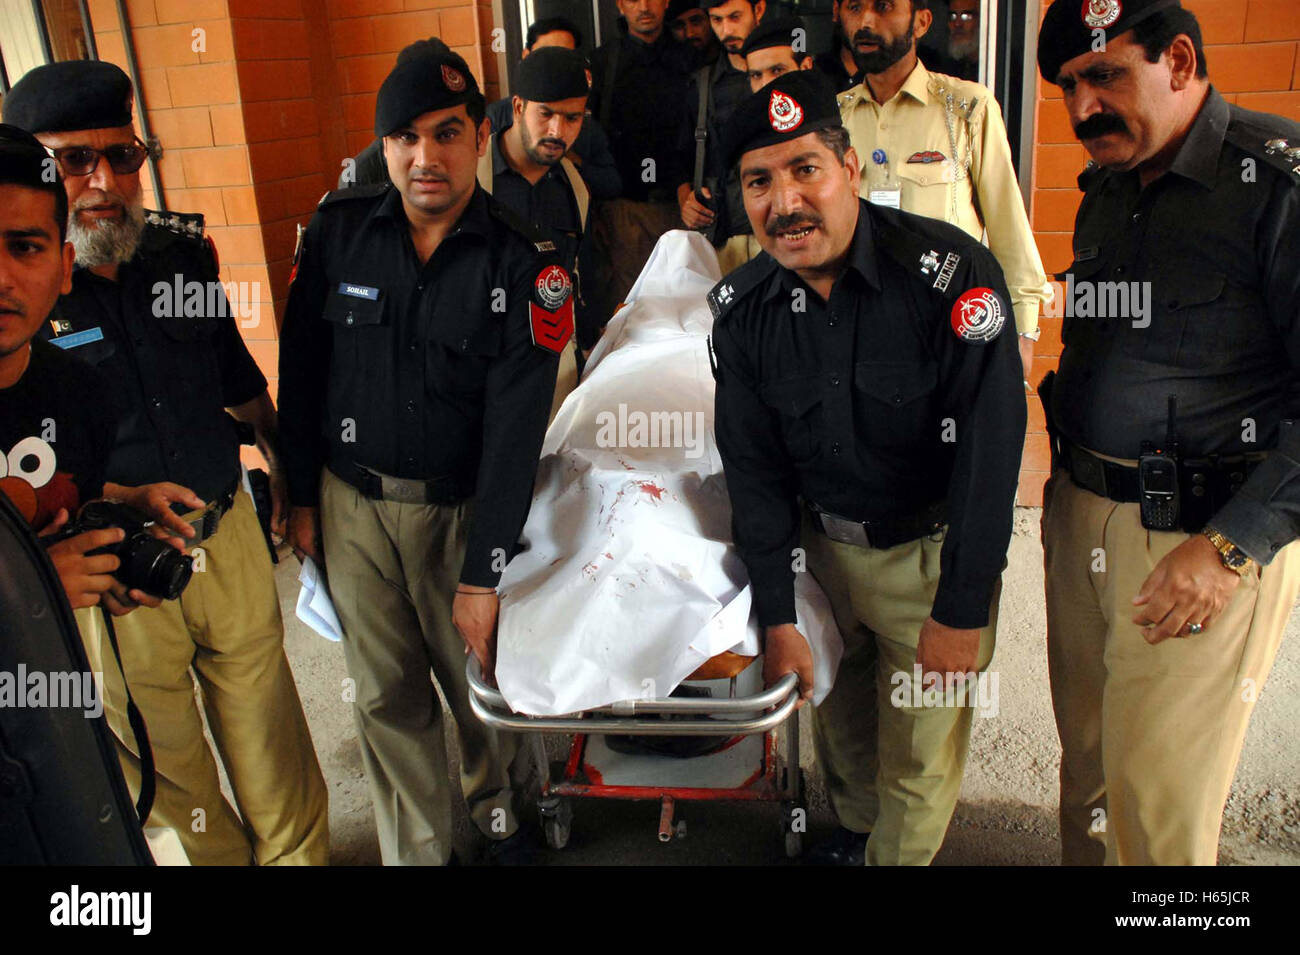 Pakistan. 25th October, 2016. Dead body of police official victim of bomb explosion planted near roadside occurred near MCA School in Daudzai area, shifted at local hospital in Peshawar on Tuesday, October 25, 2016. A policeman guarding polio workers on the second day of a vaccination campaign was killed in a roadside blast in Peshawar. The explosion occurred near MCA School in Daudzai area, injuring two policemen. They were shifted to Lady Reading Hospital (LRH) where one of them identified as Nazir succumbed to his injuries. Credit:  Asianet-Pakistan/Alamy Live News Stock Photo